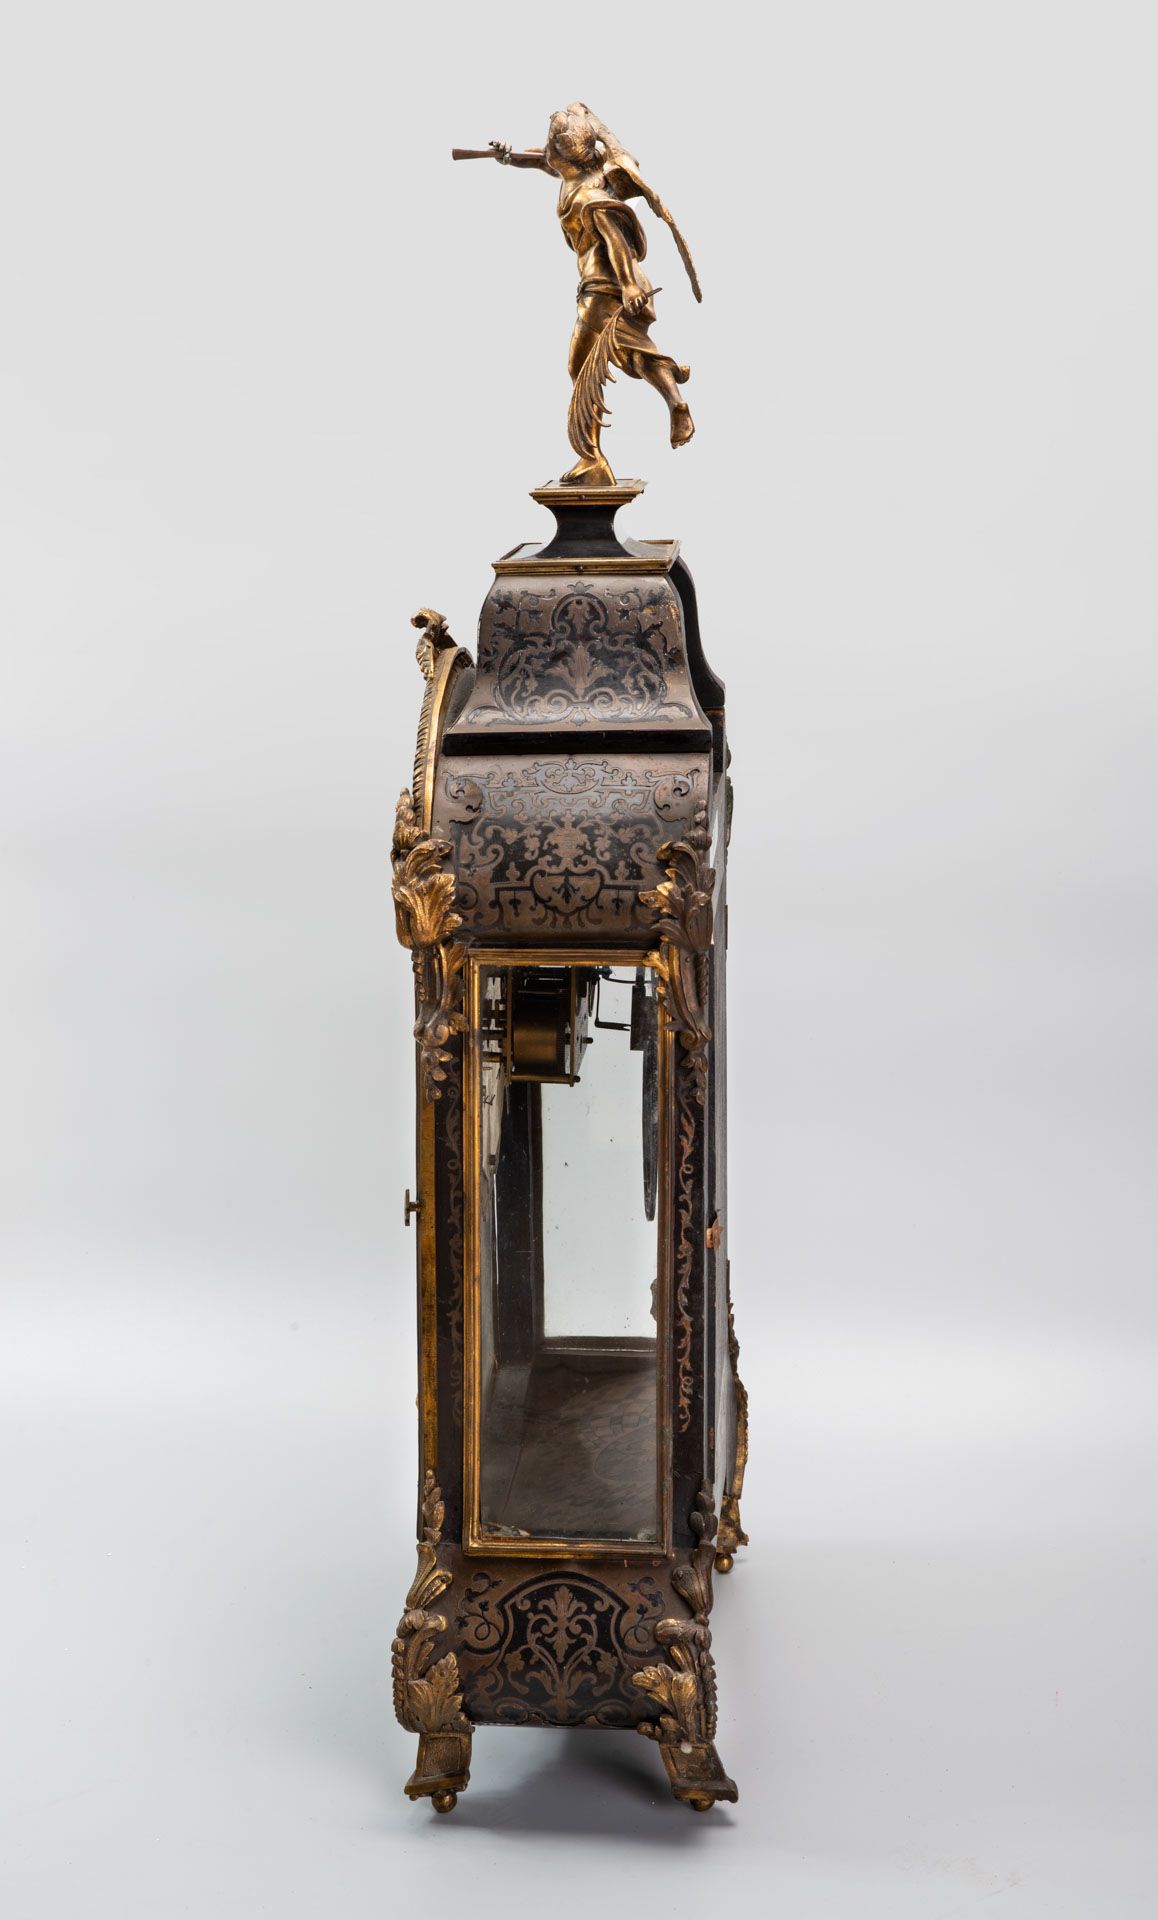 A Fine Boulle Clock by Charles Baltazar, France, Mid-Late 18th Century - Image 3 of 5